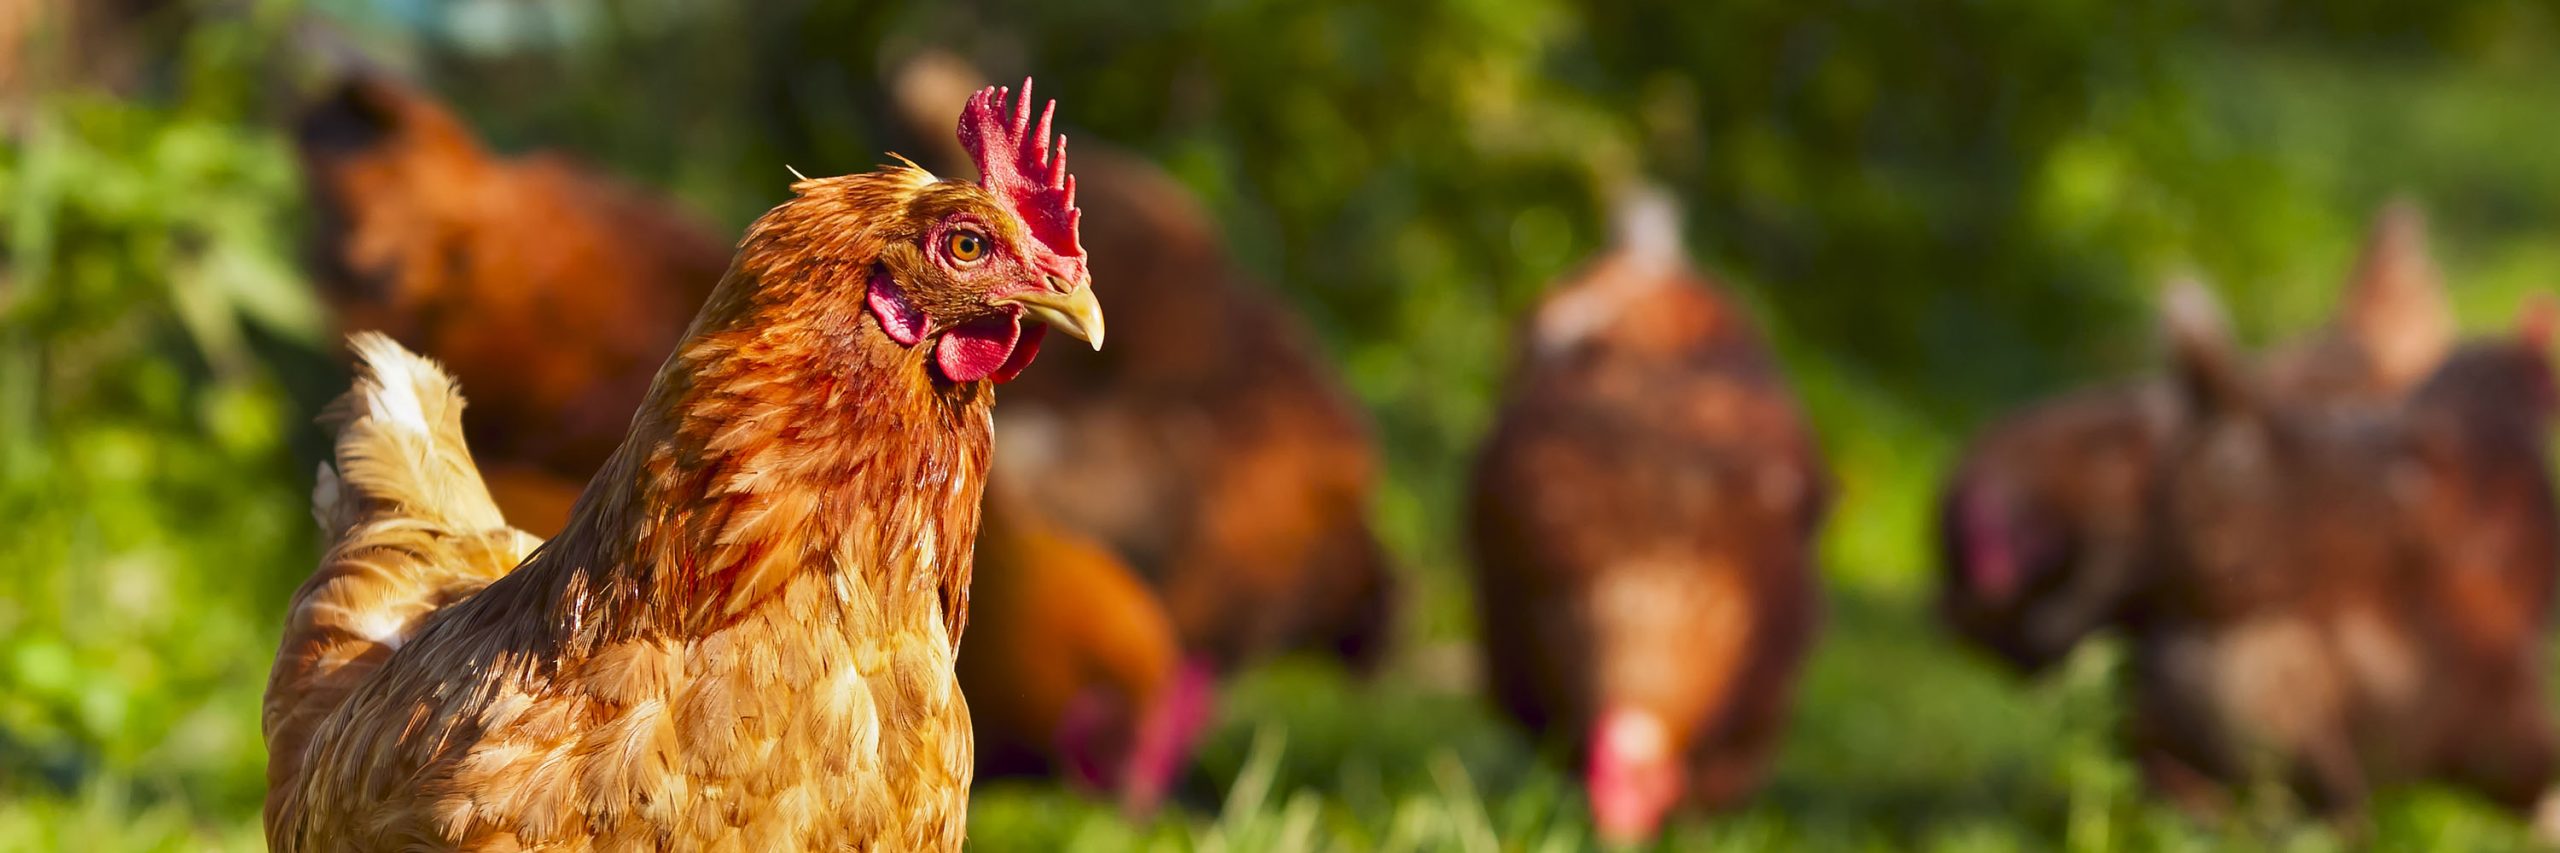 Animal Equality's Work In Spain Leads to Reduction of Caged Hens